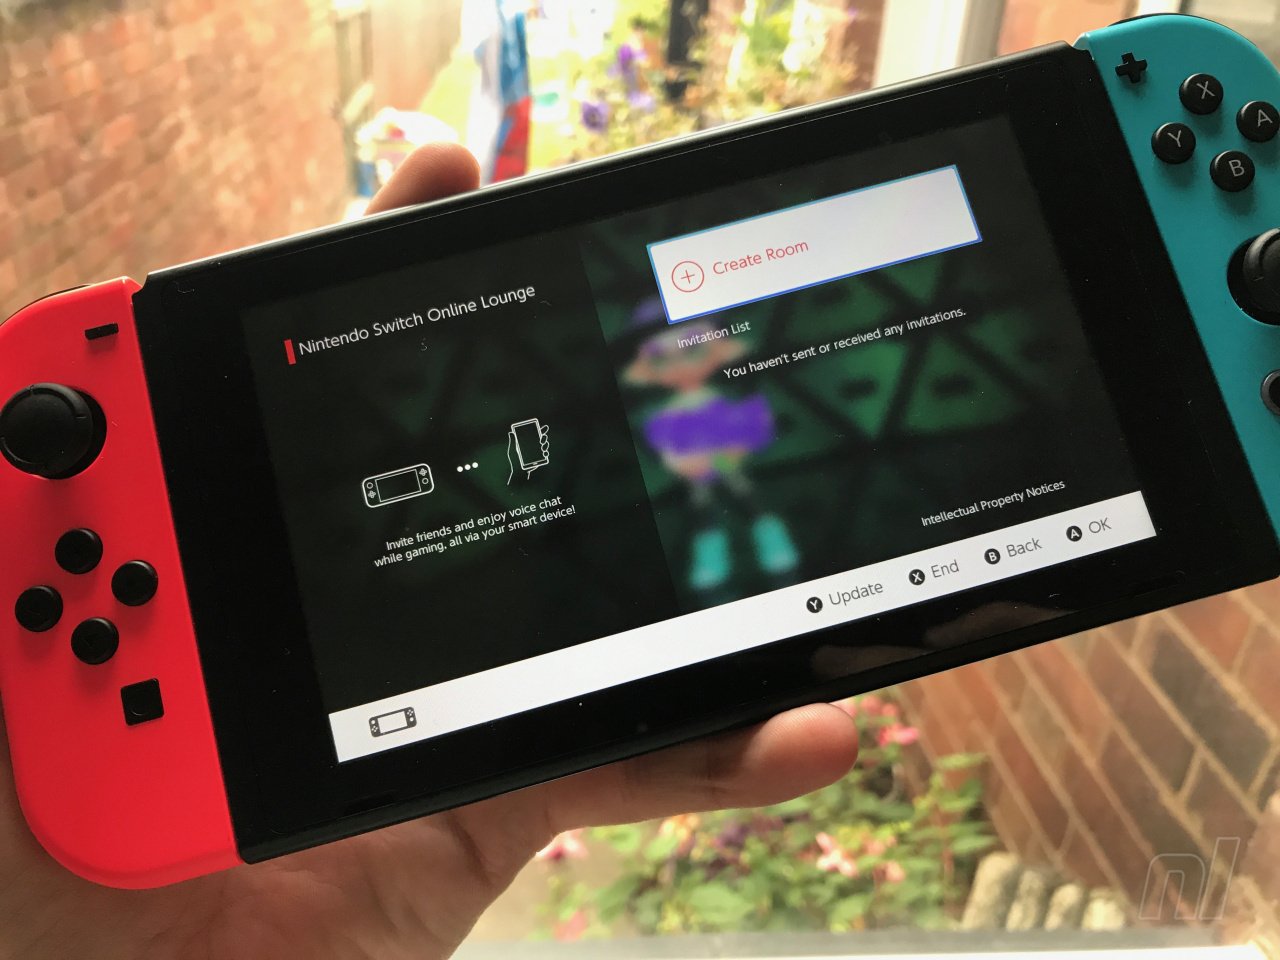 How To Invite Friends And Use Voice On The Switch App | Nintendo Life